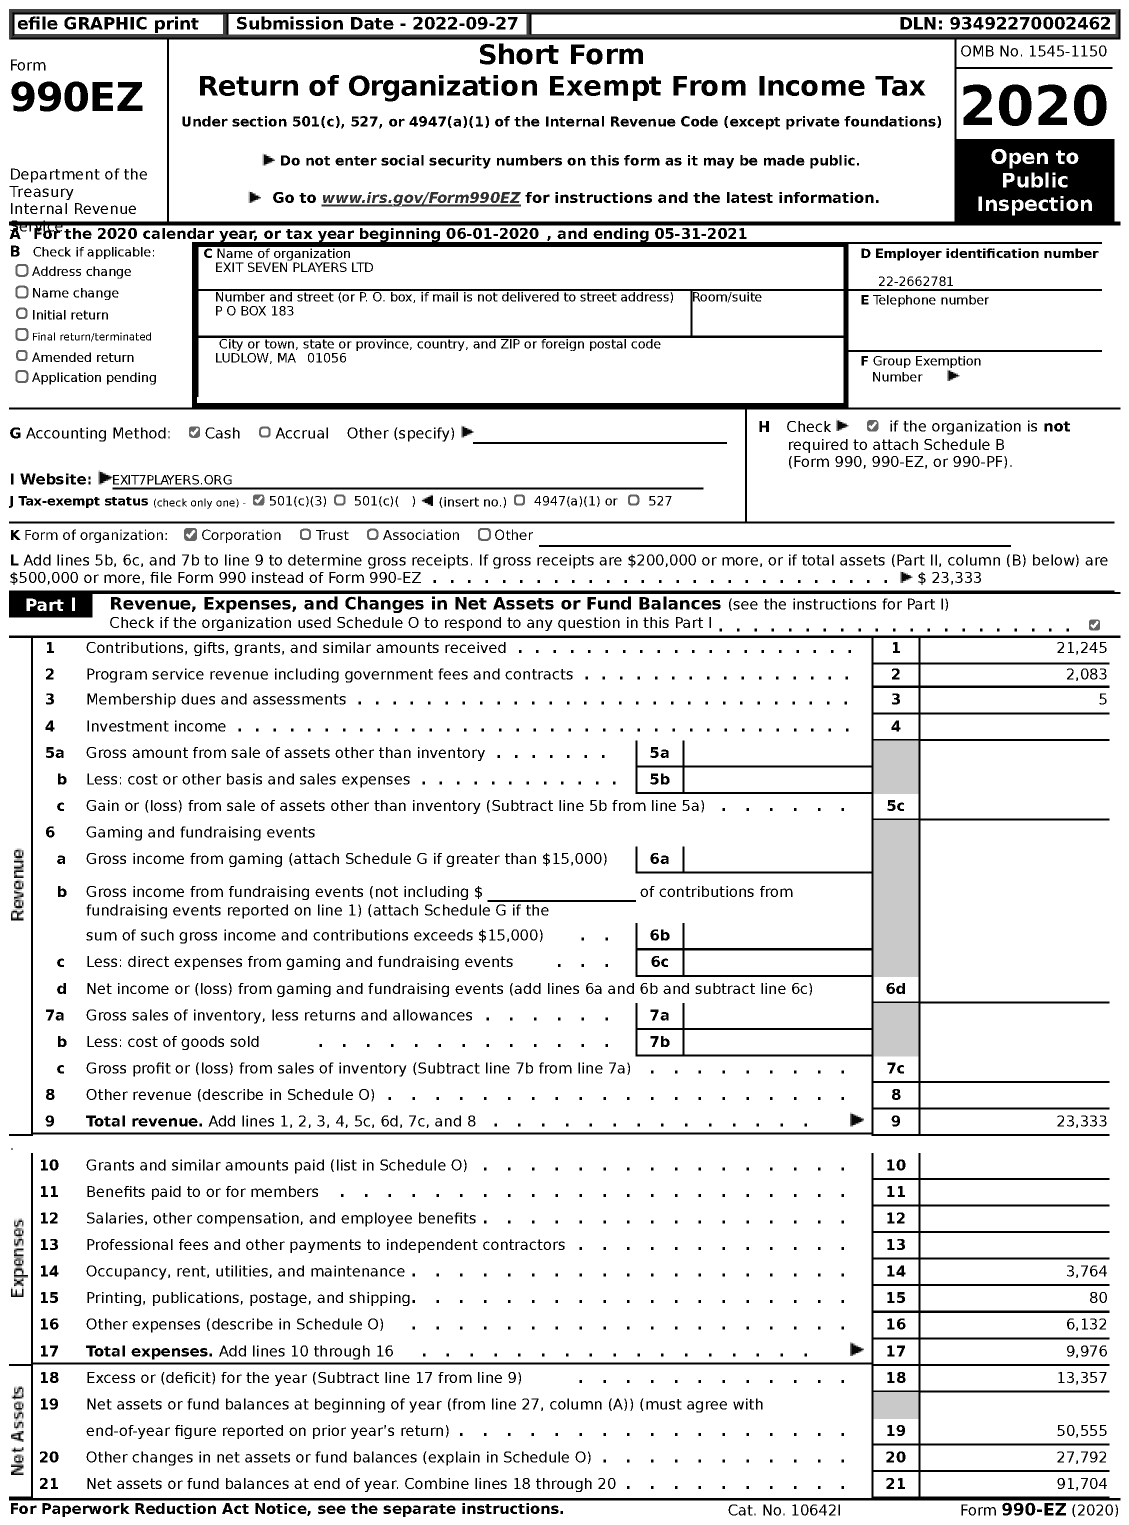 Image of first page of 2020 Form 990EZ for Exit Seven Players